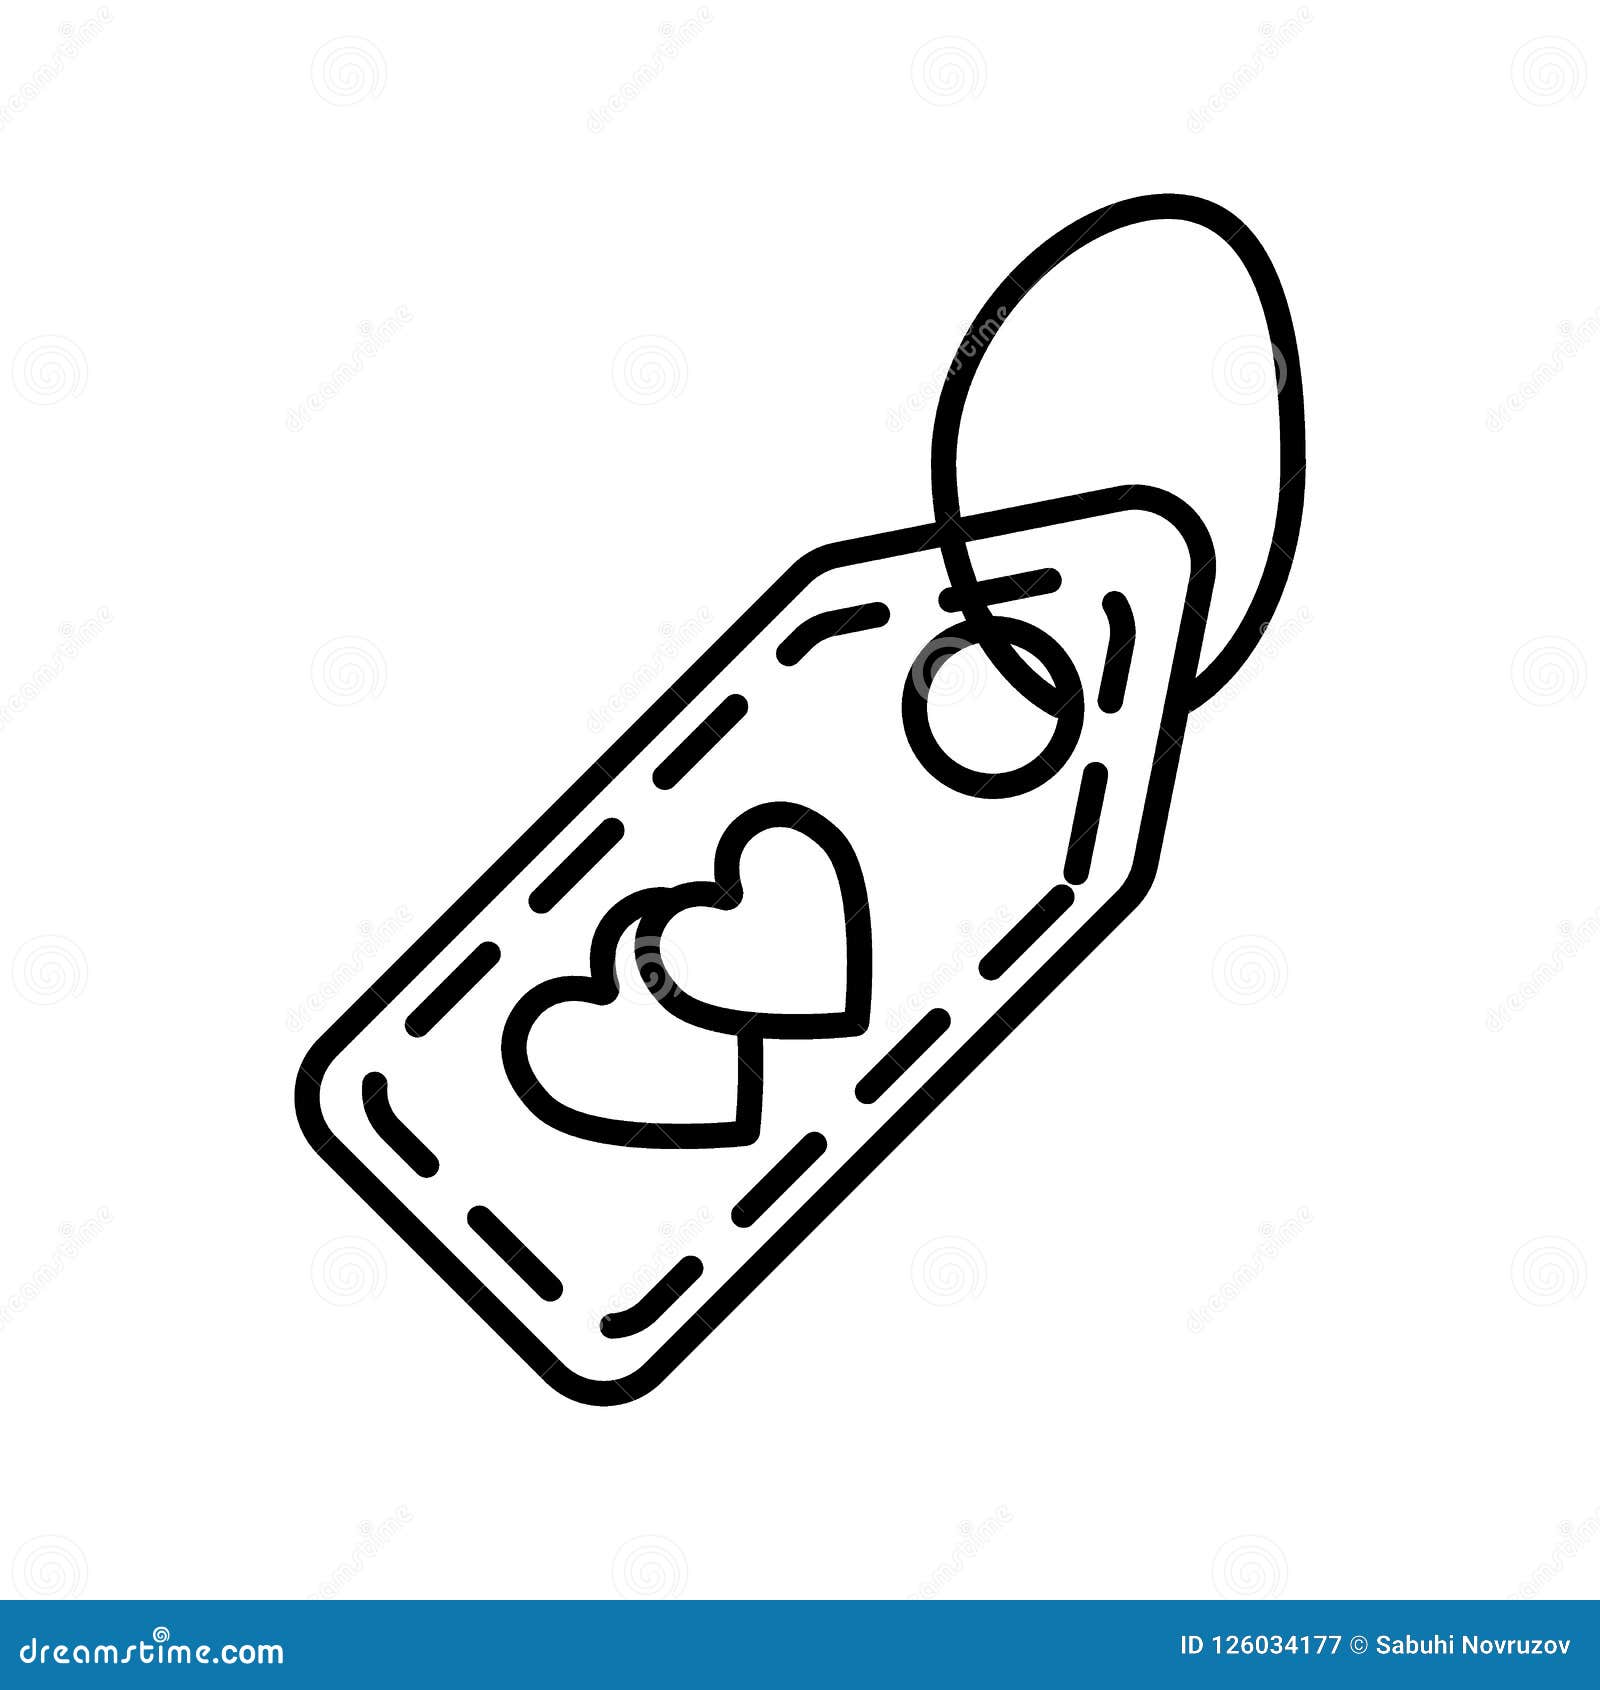 Download A Keychain With Heart Line Icon. Key Ring Vector ...